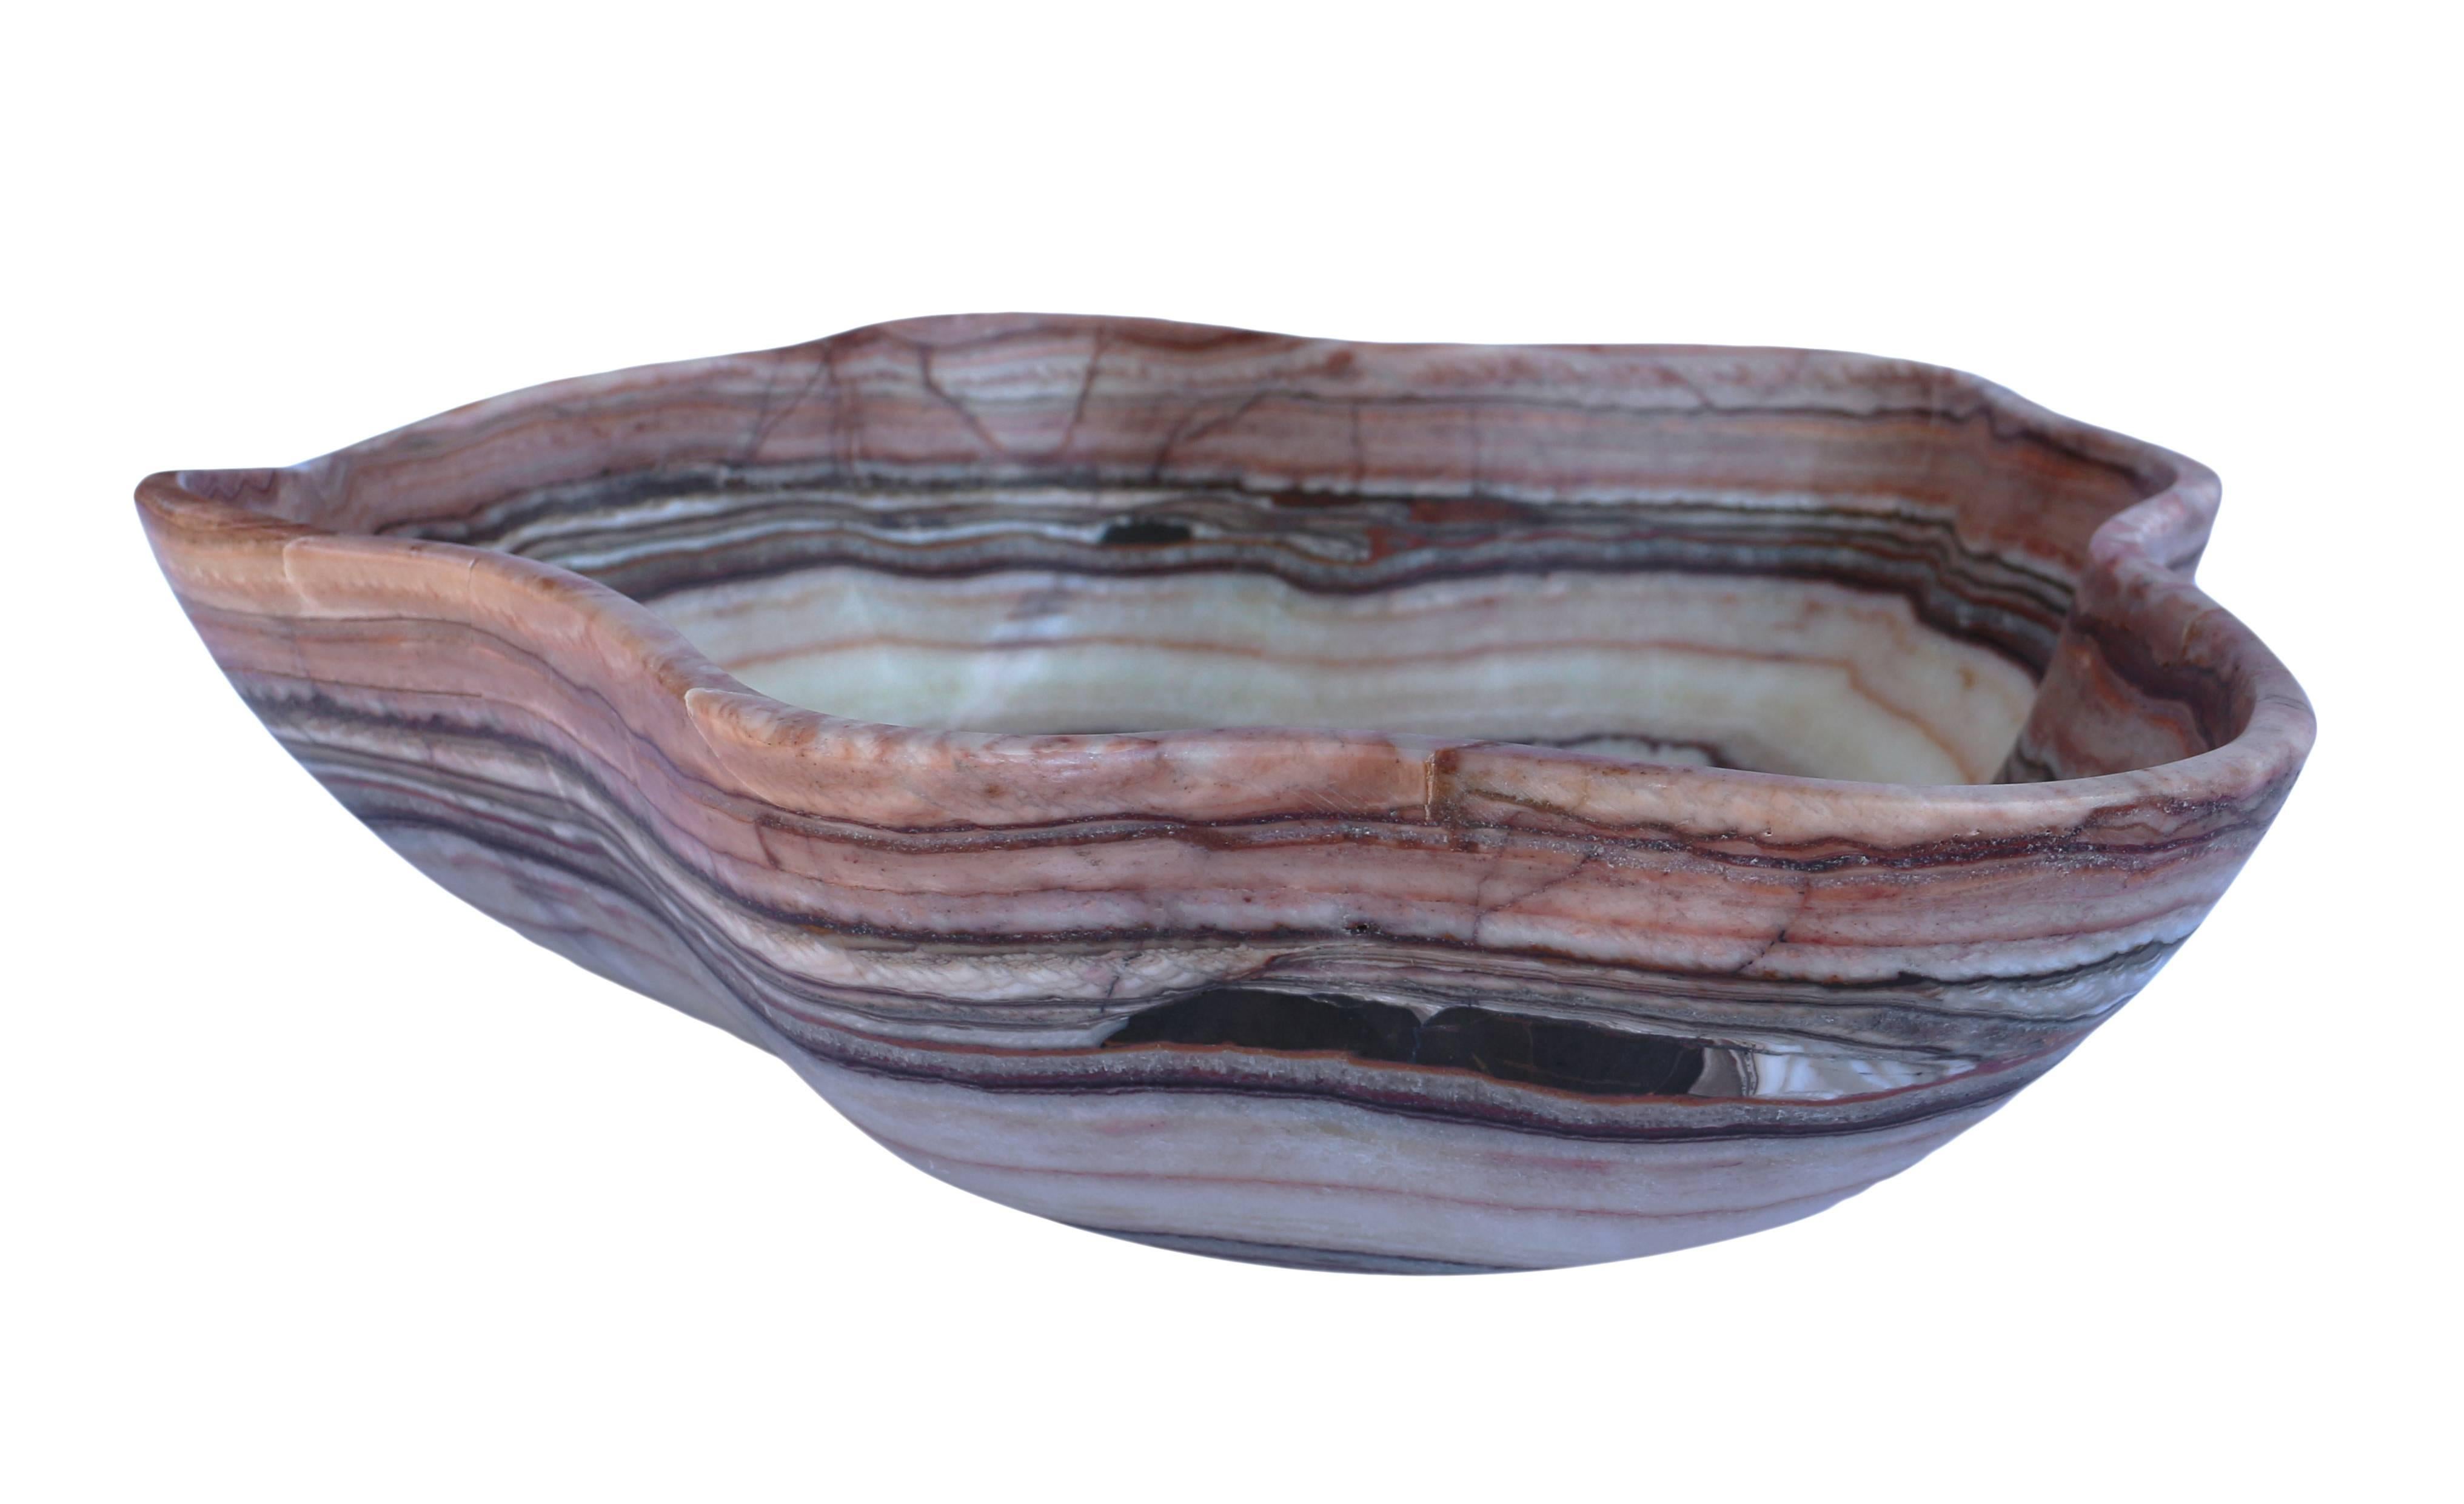 Free-form hand-carved onyx bowl. Dimensions are approximate due to variations in the natural shape and height.